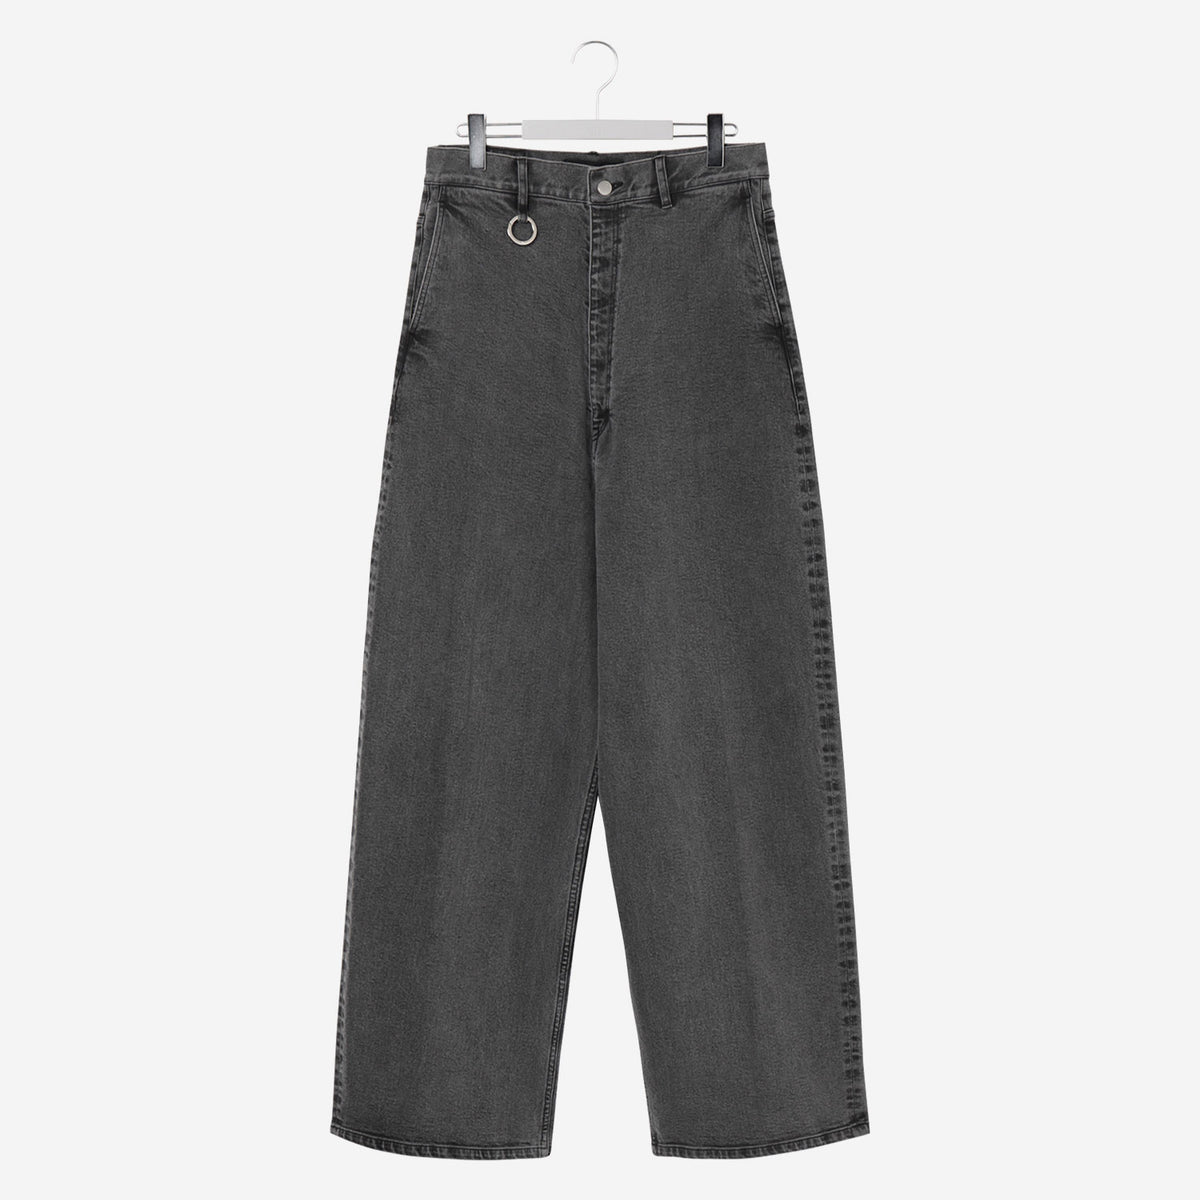 HAUSER / Super Wide Denim Pants / fade gray – th products